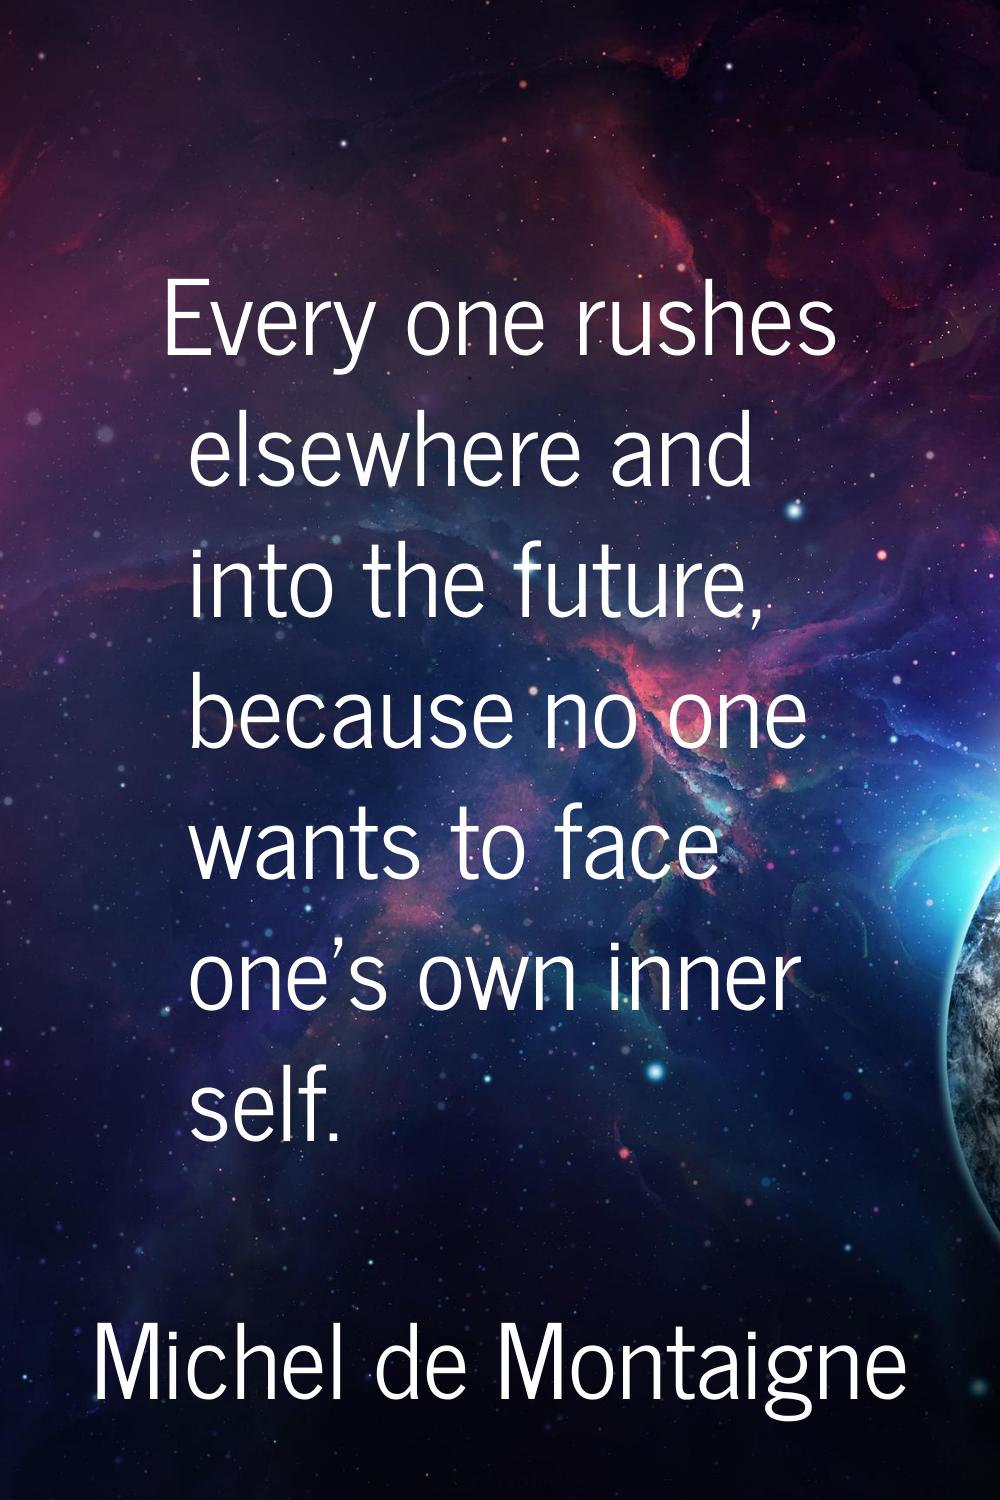 Every one rushes elsewhere and into the future, because no one wants to face one's own inner self.